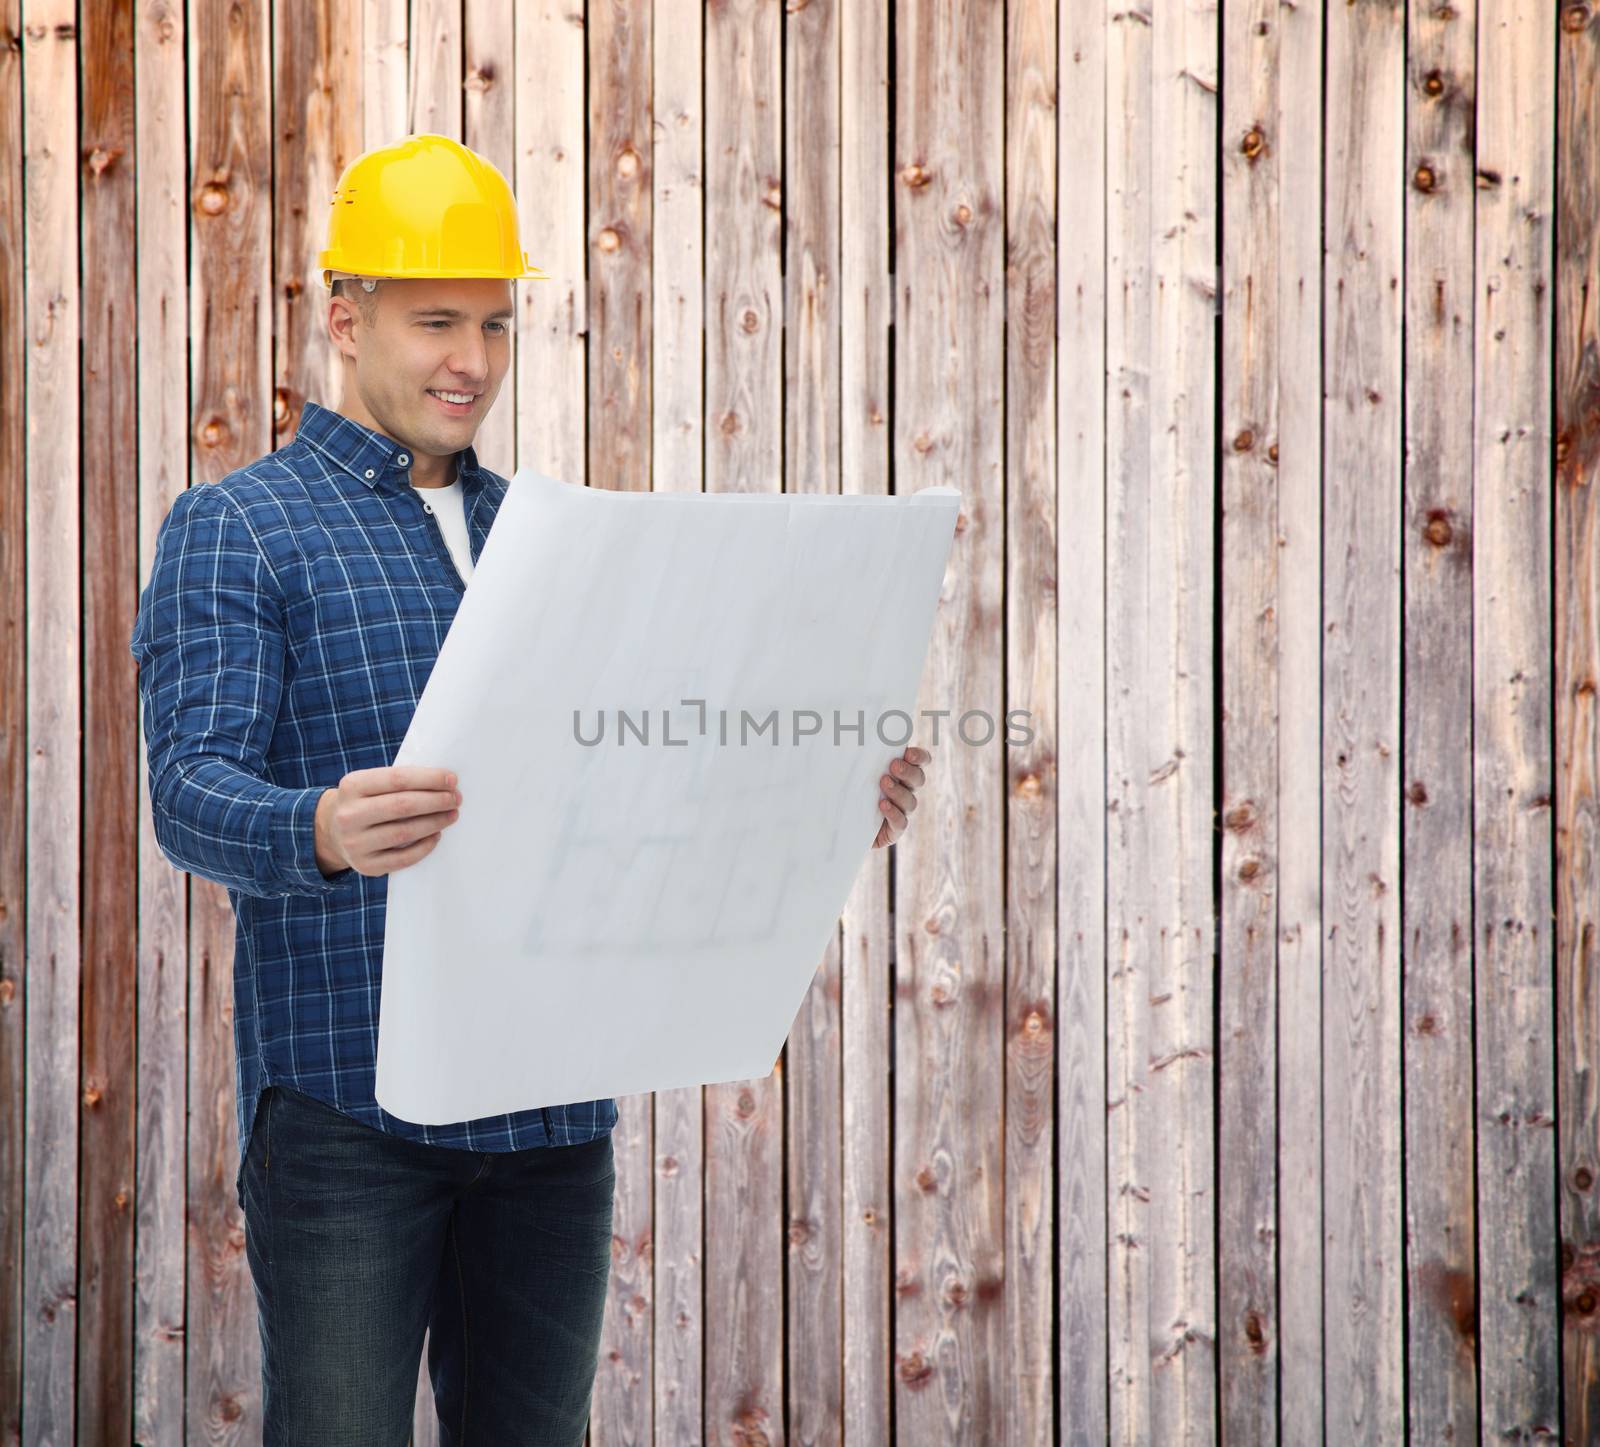 repair, construction, building, people and maintenance concept - smiling male builder or manual worker in helmet with blueprint over wooden fence background